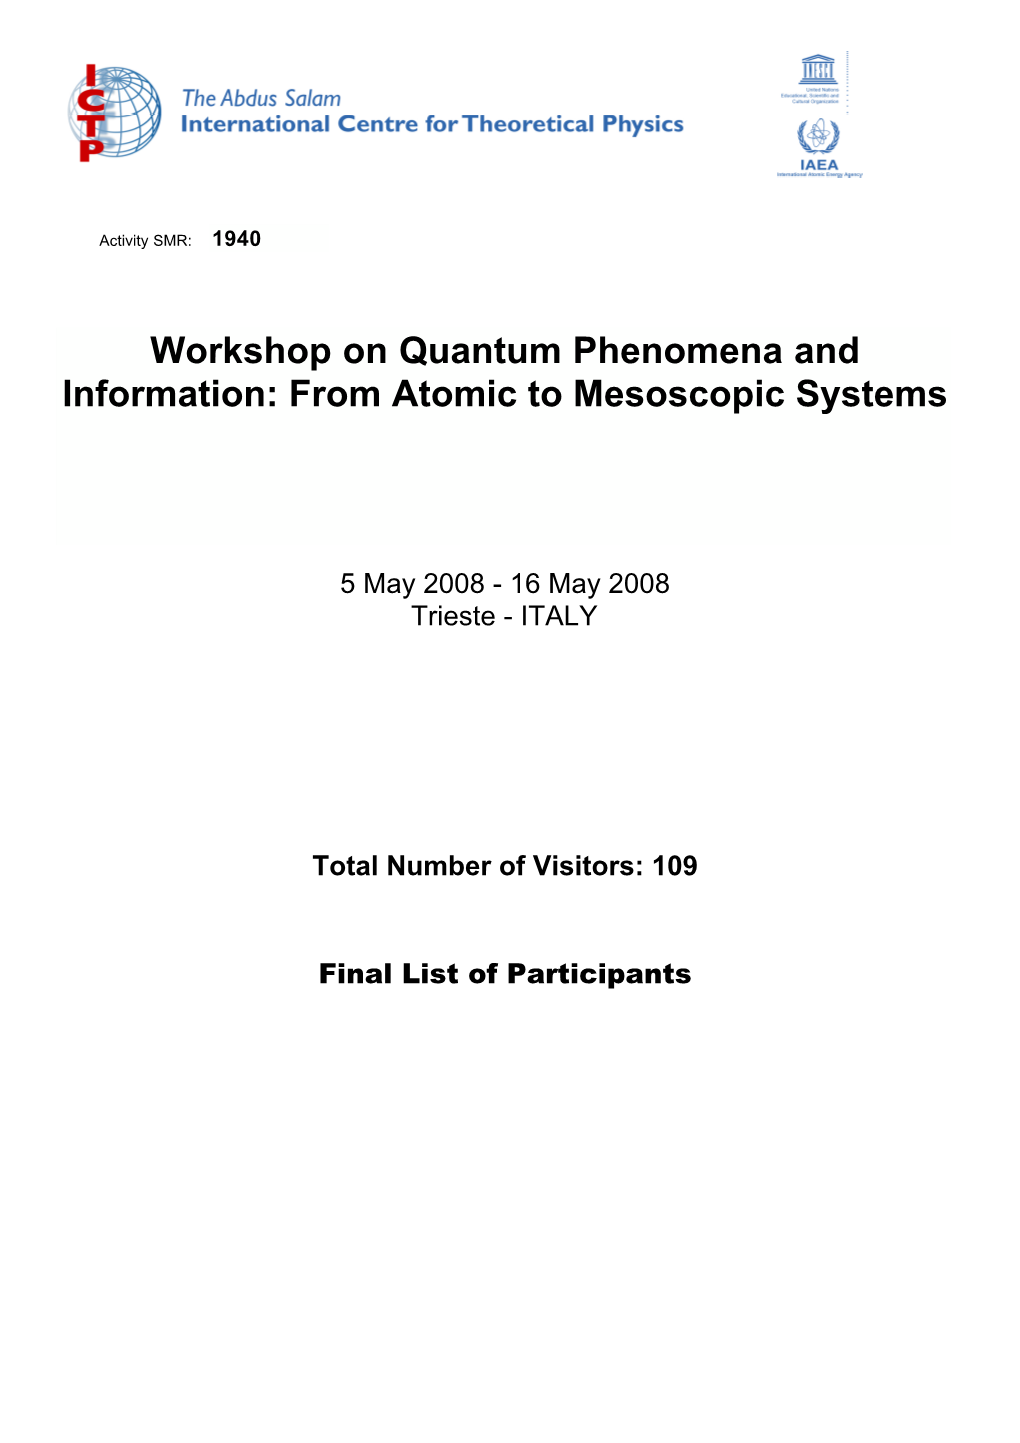 Workshop on Quantum Phenomena and Information: from Atomic to Mesoscopic Systems